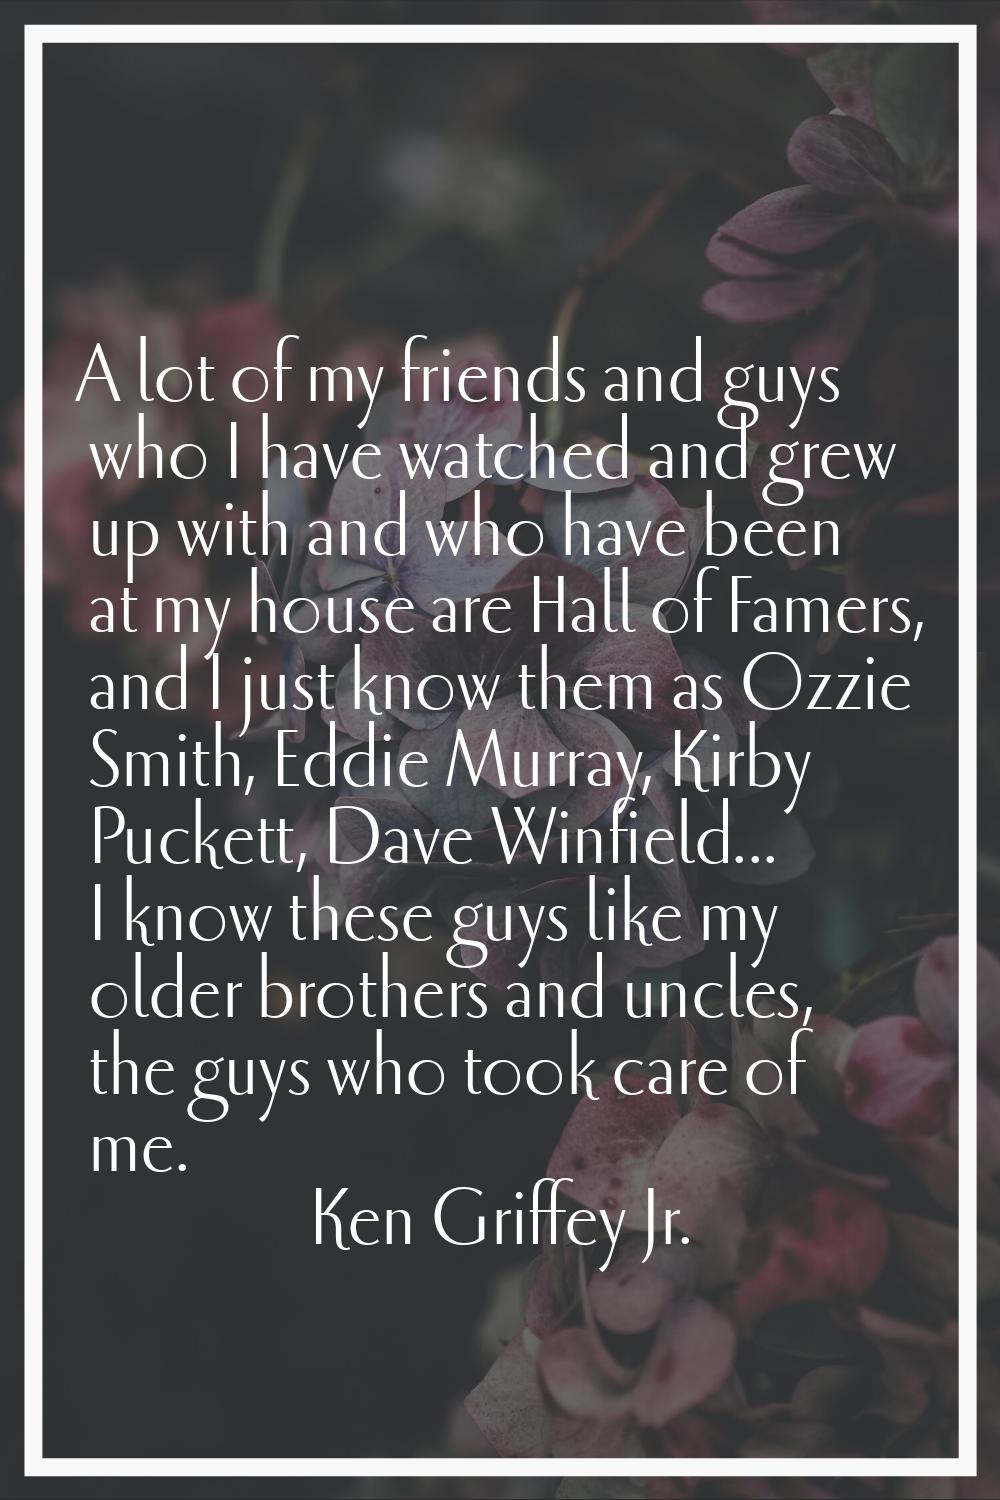 A lot of my friends and guys who I have watched and grew up with and who have been at my house are 